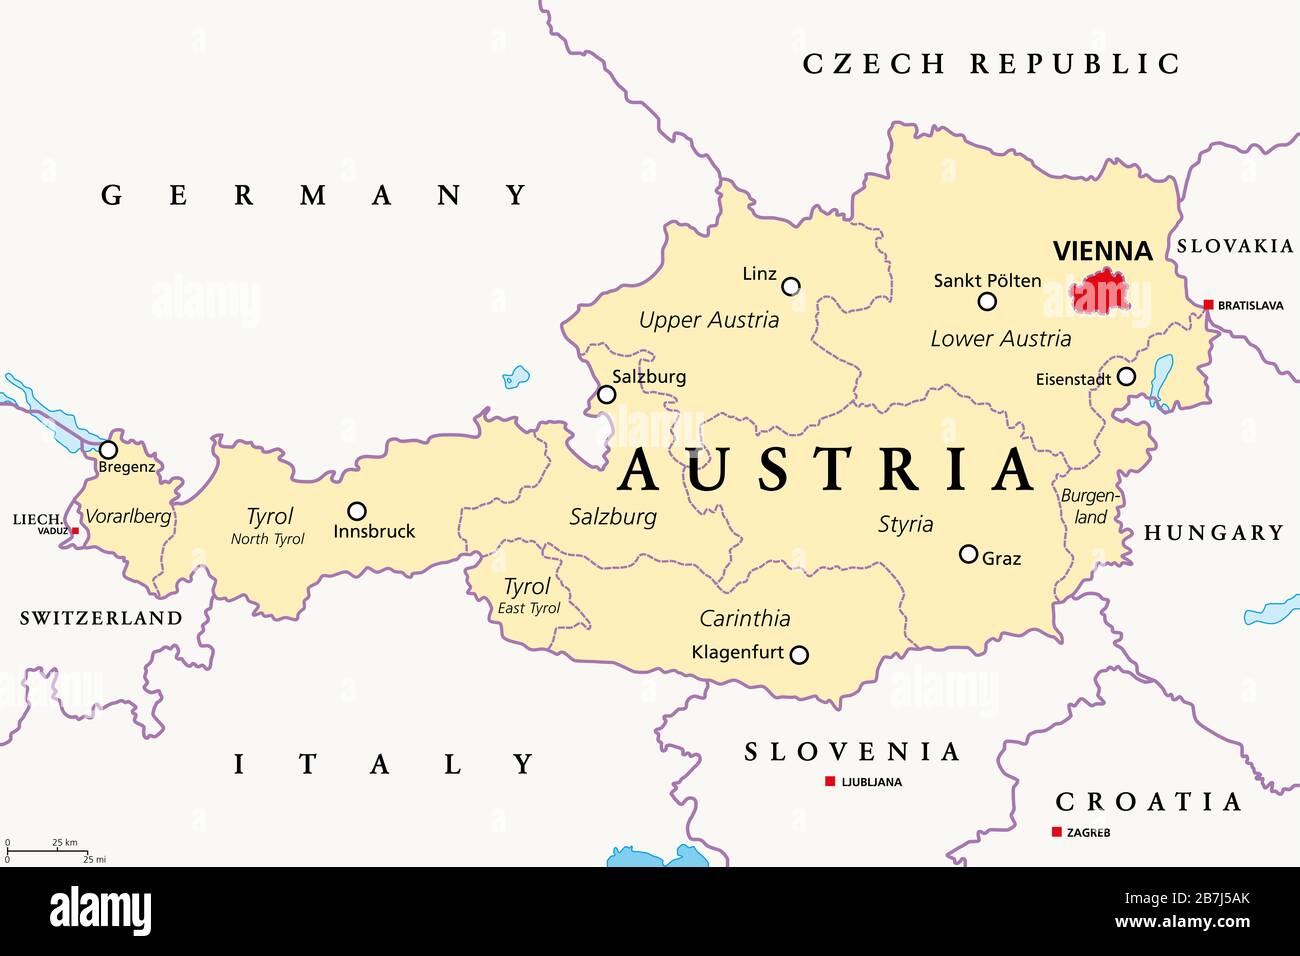 Austria Political Map With The Capital Vienna Nine Federated States And Their Capitals With Borders And The Neighbor Countries English Labeling 2B7J5AK 